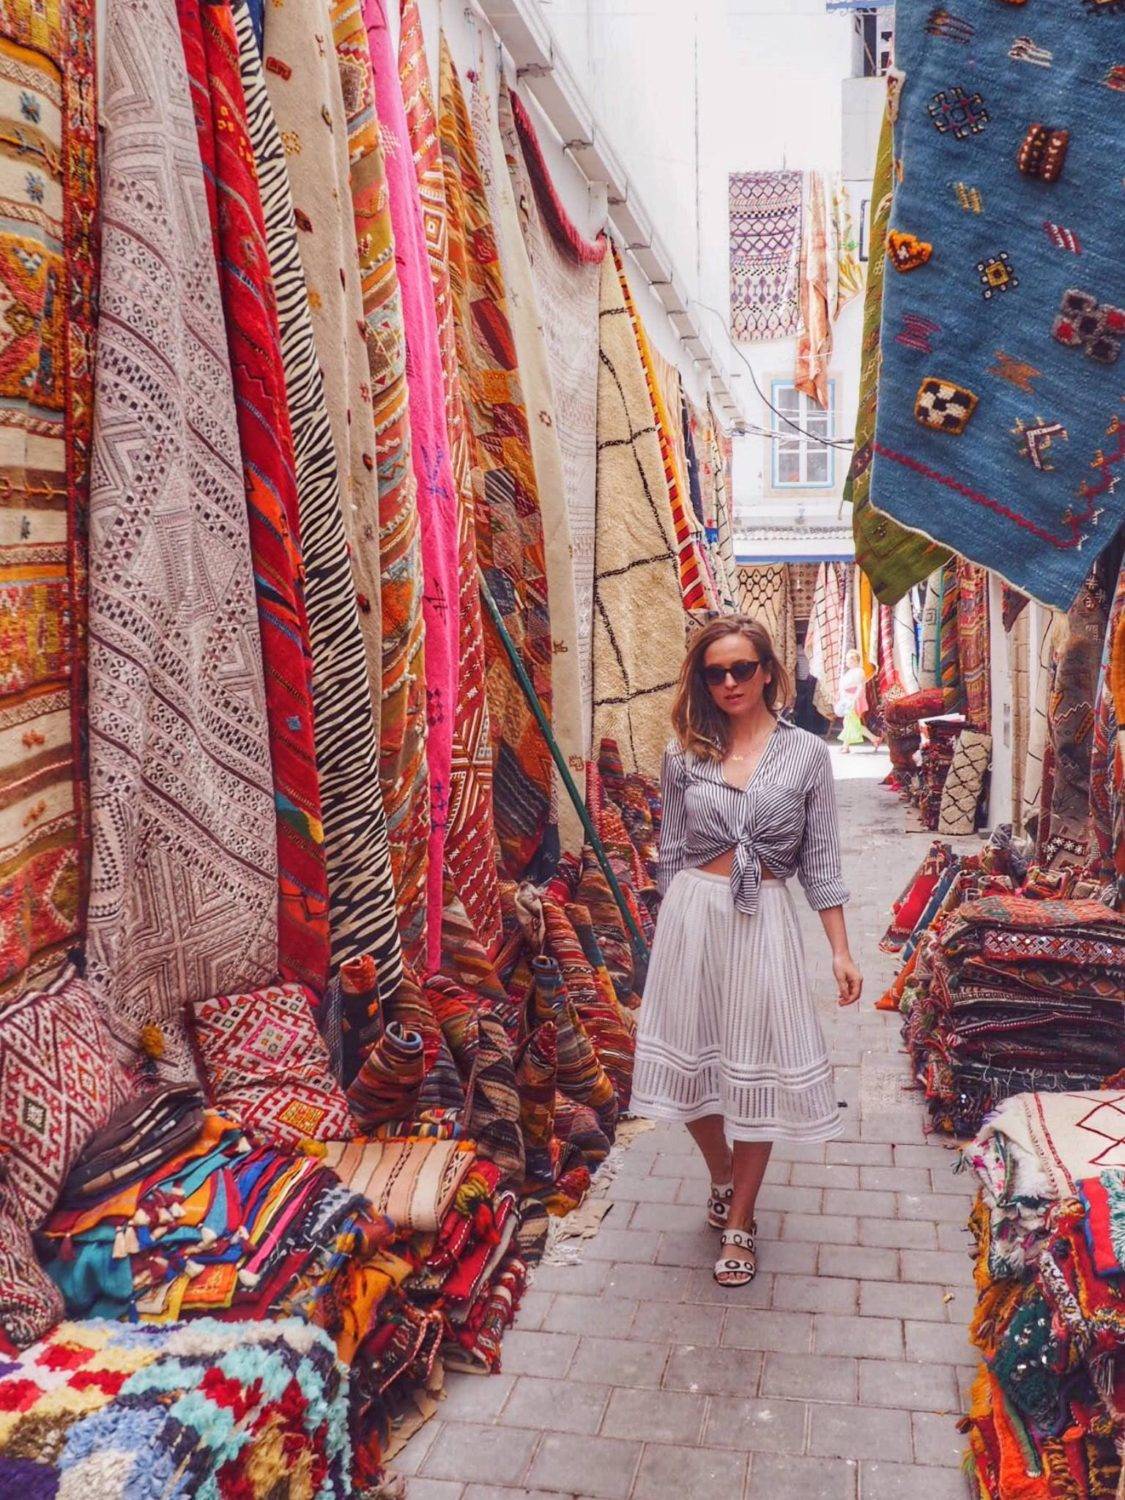 What to do in Essaouira Morocco on a day trip